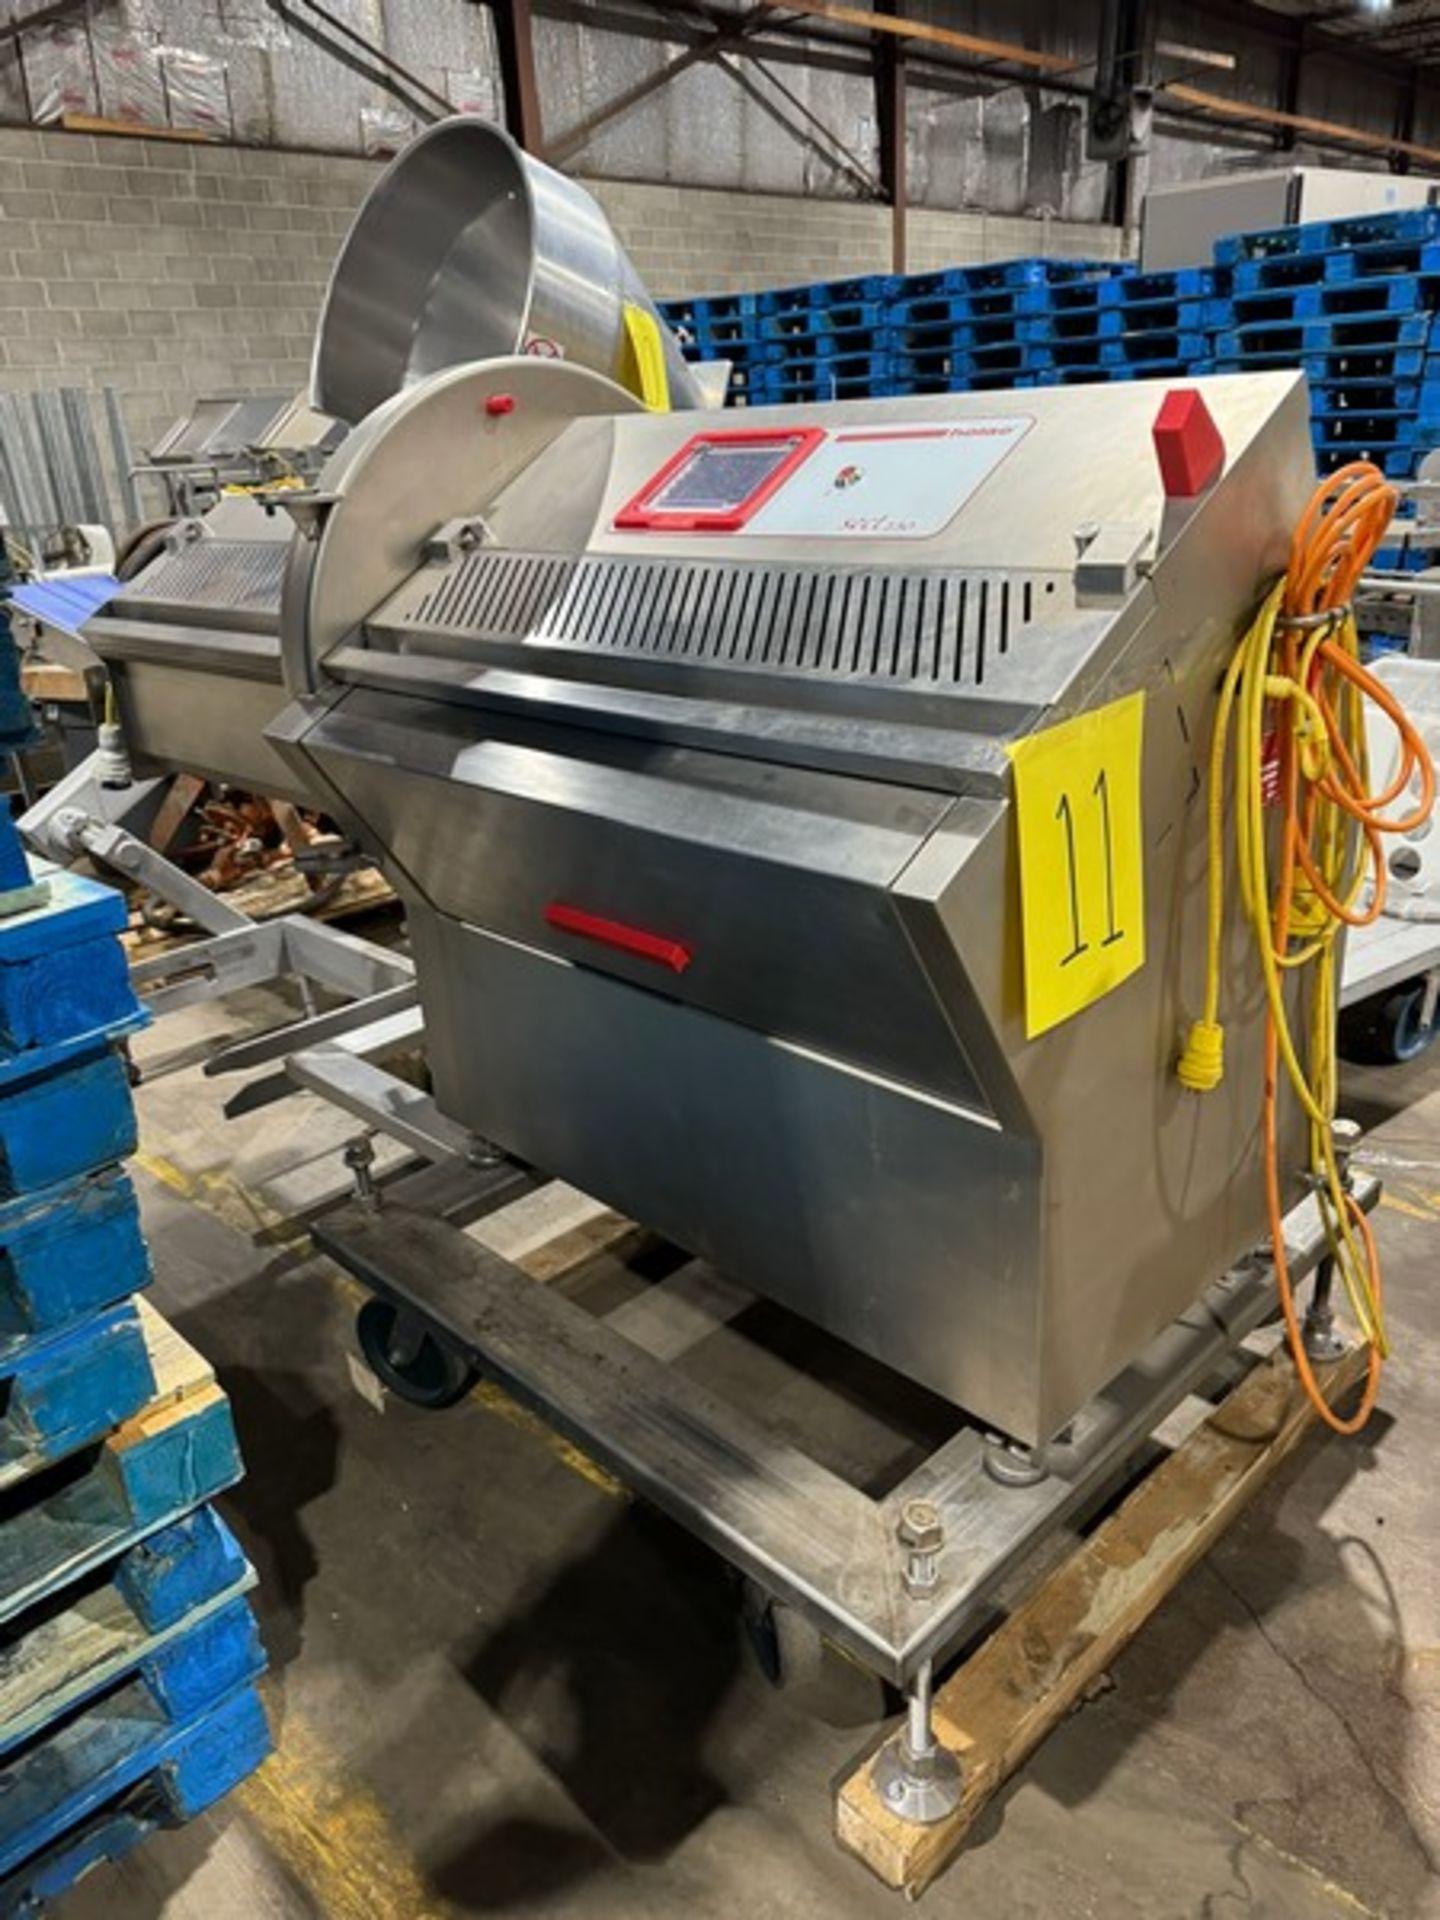 2017 Holac Slicer, Type: sect 230 TC, S/N 270-00-89, 440 Volts (RIGGING, LOADING, & SITE - Image 6 of 8